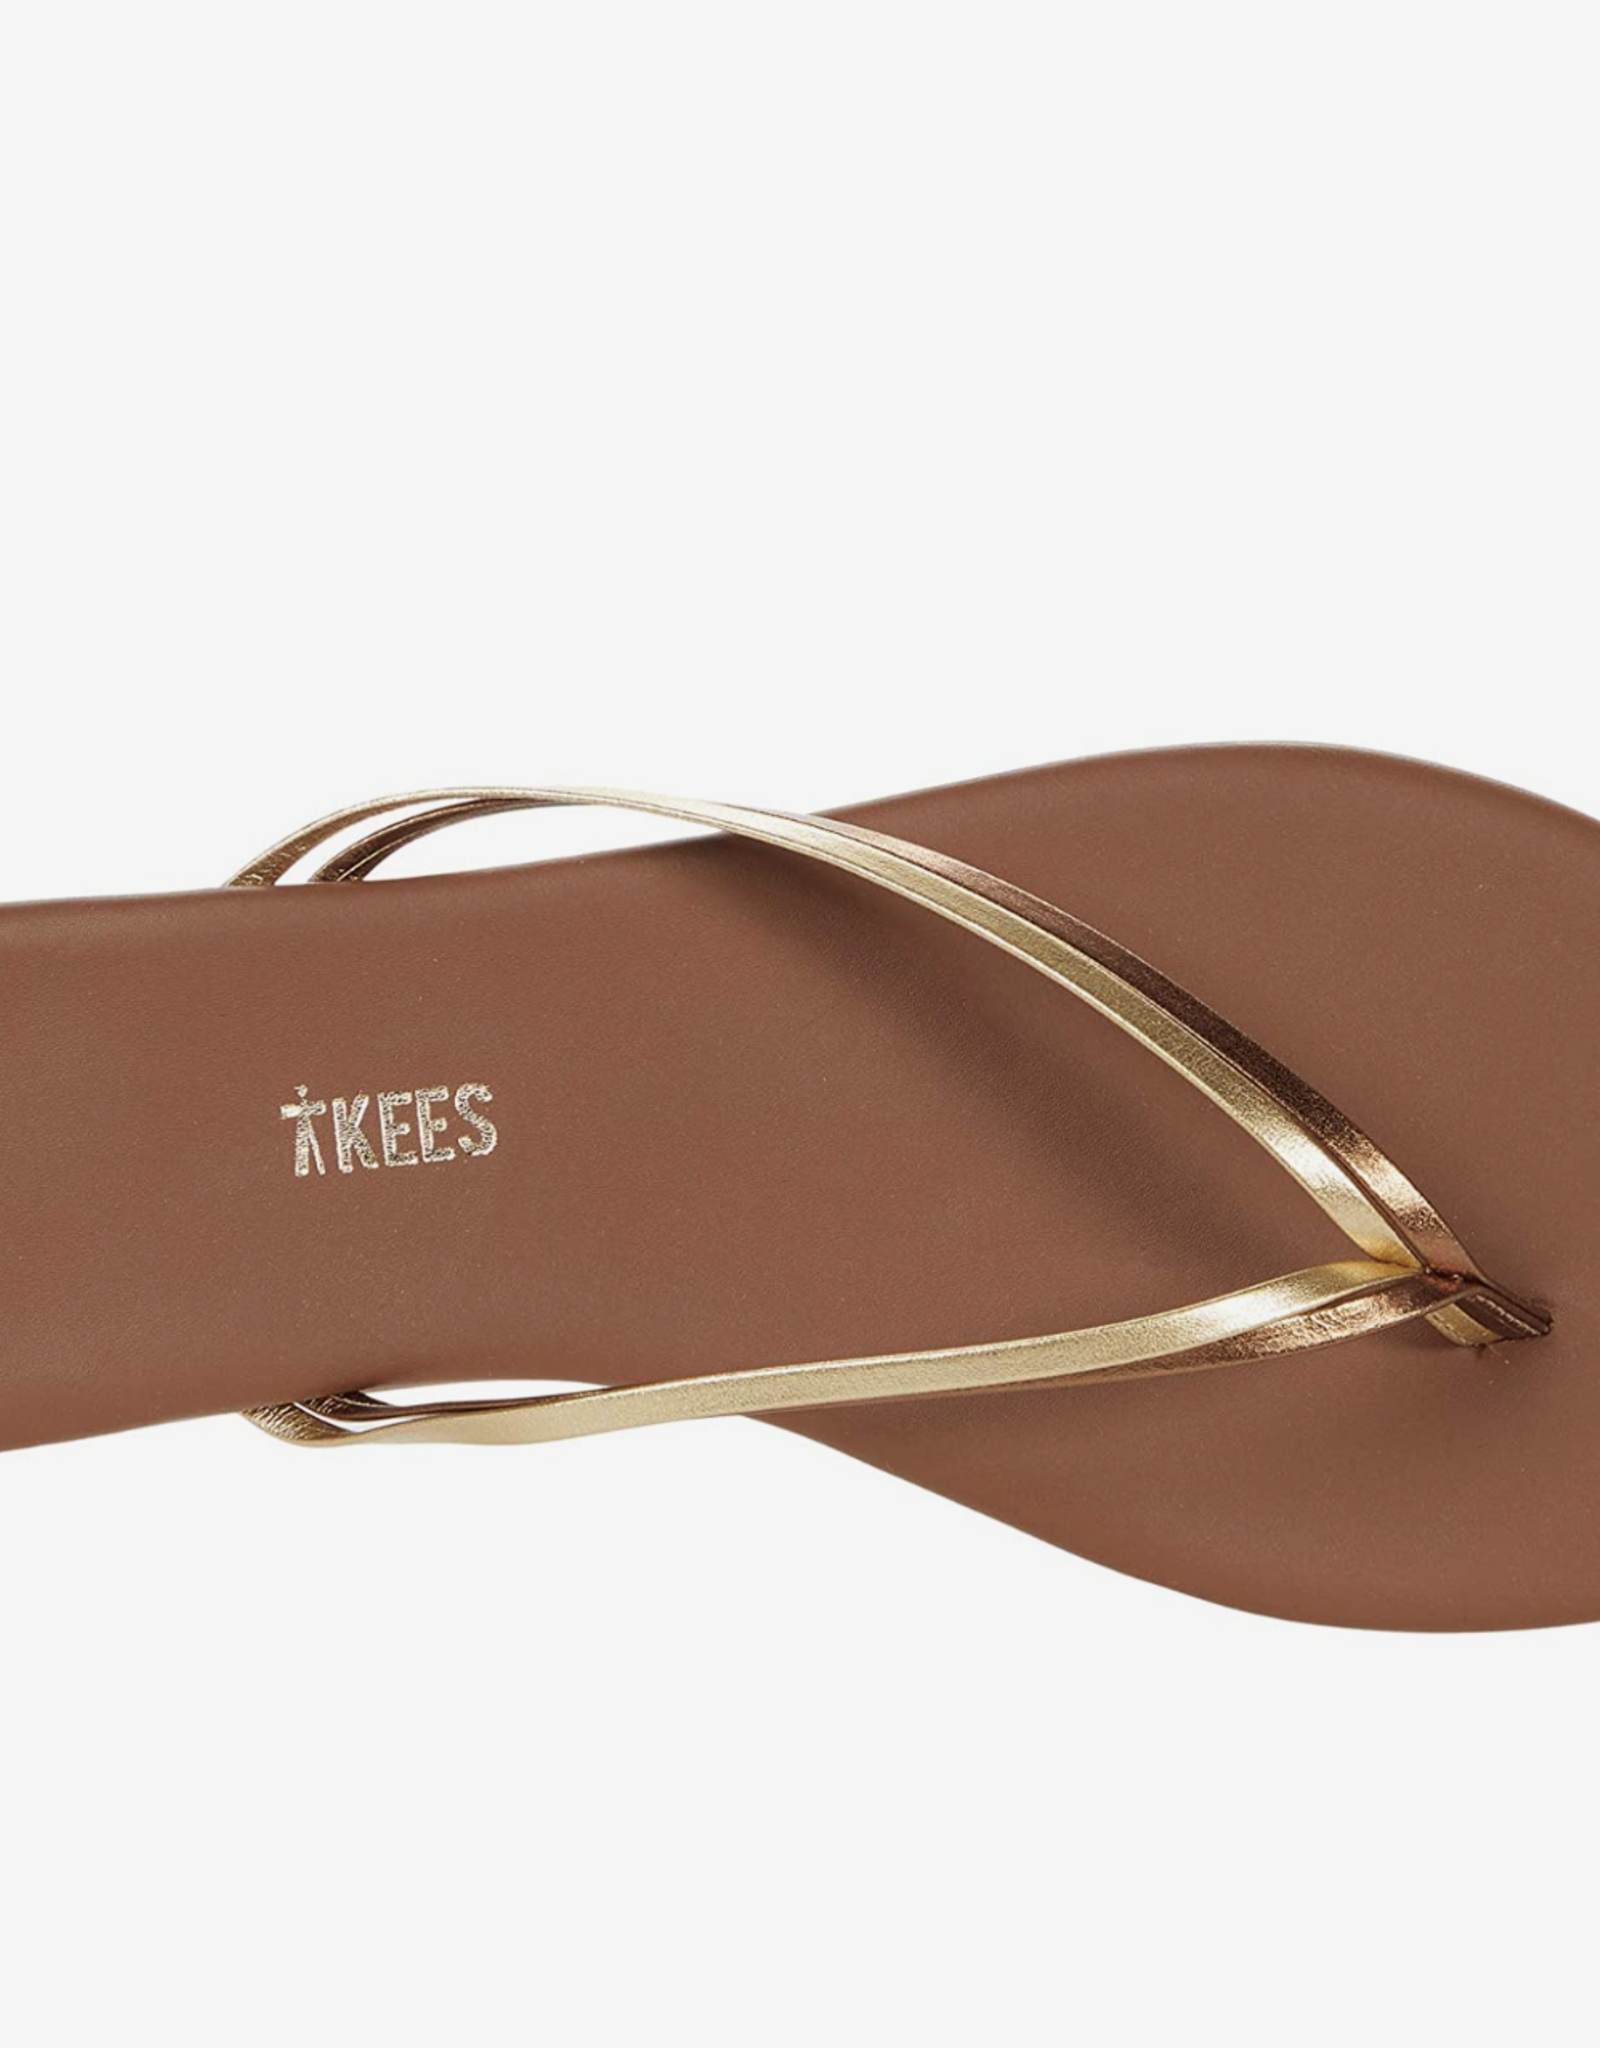 Tkees INC Tkees Duos Golden Coco Sandal